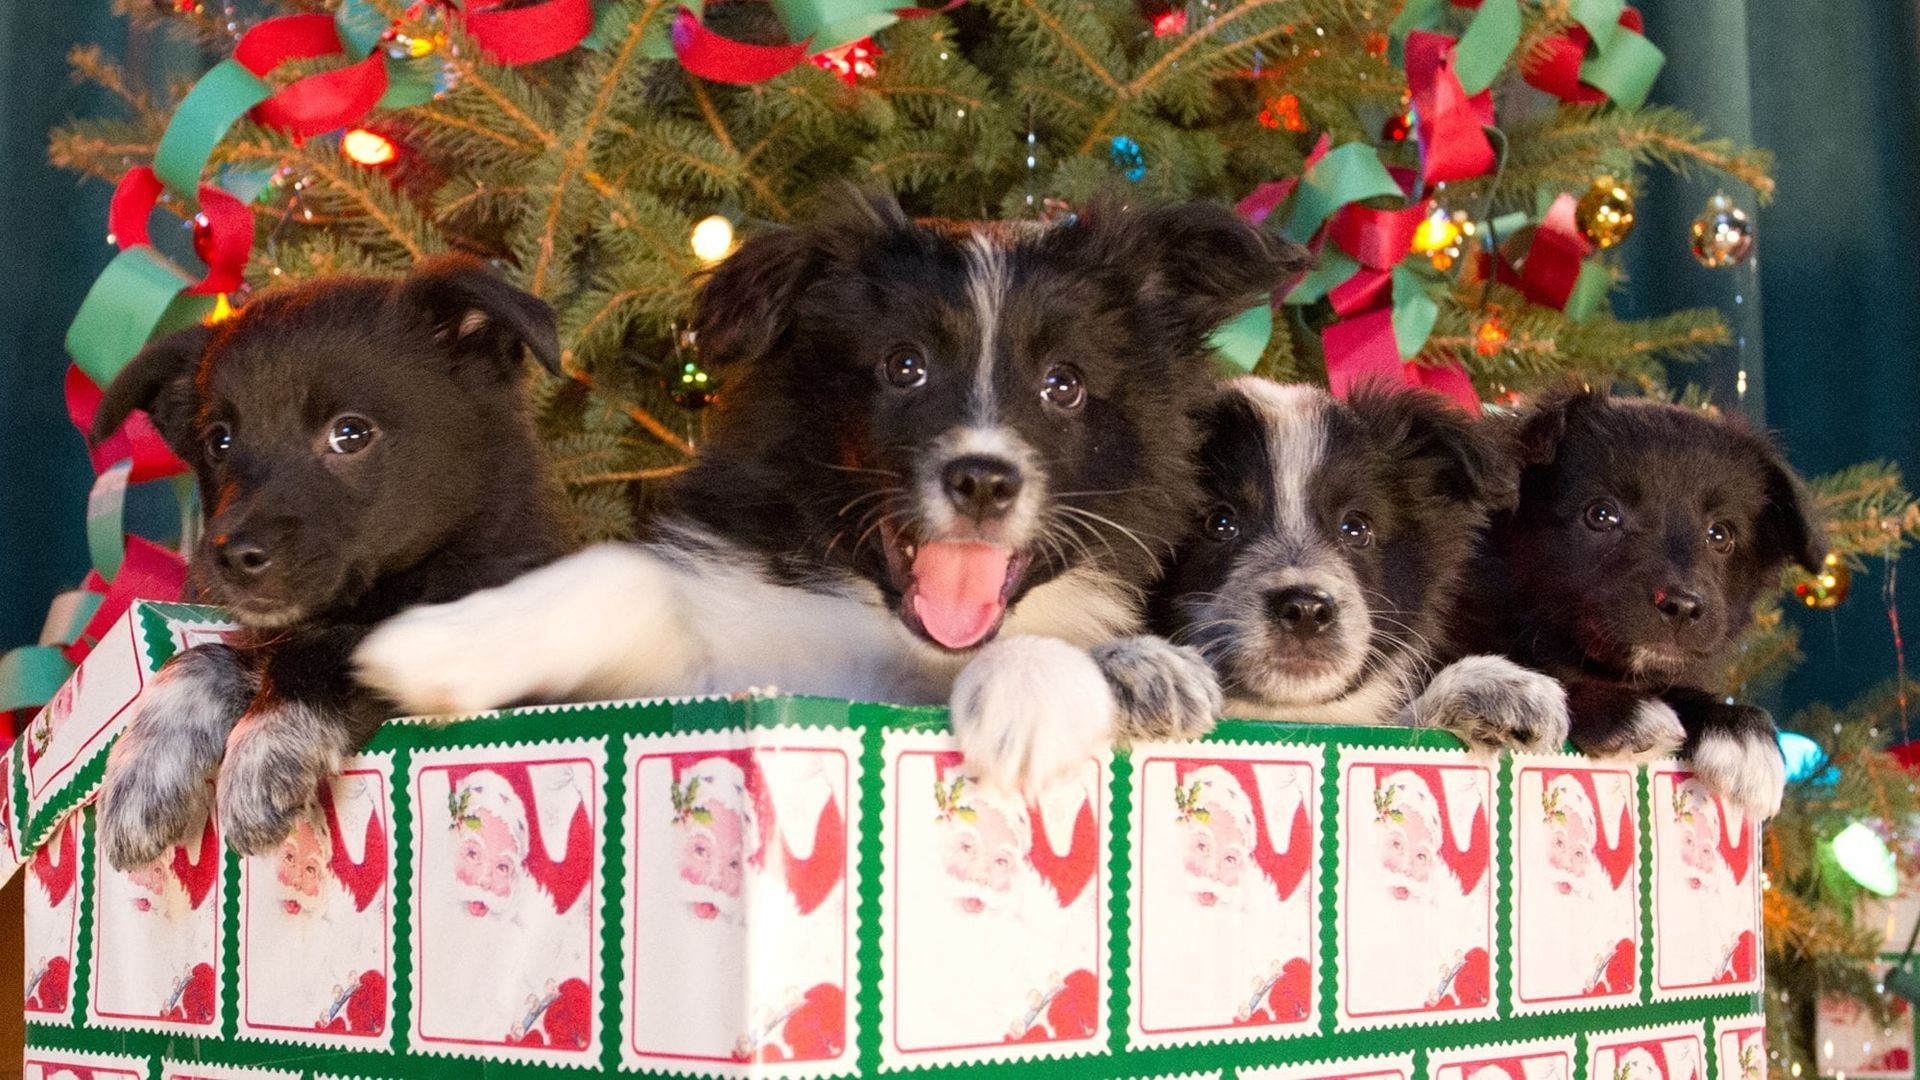 12 Dogs of Christmas: Great Puppy Rescue Backdrop